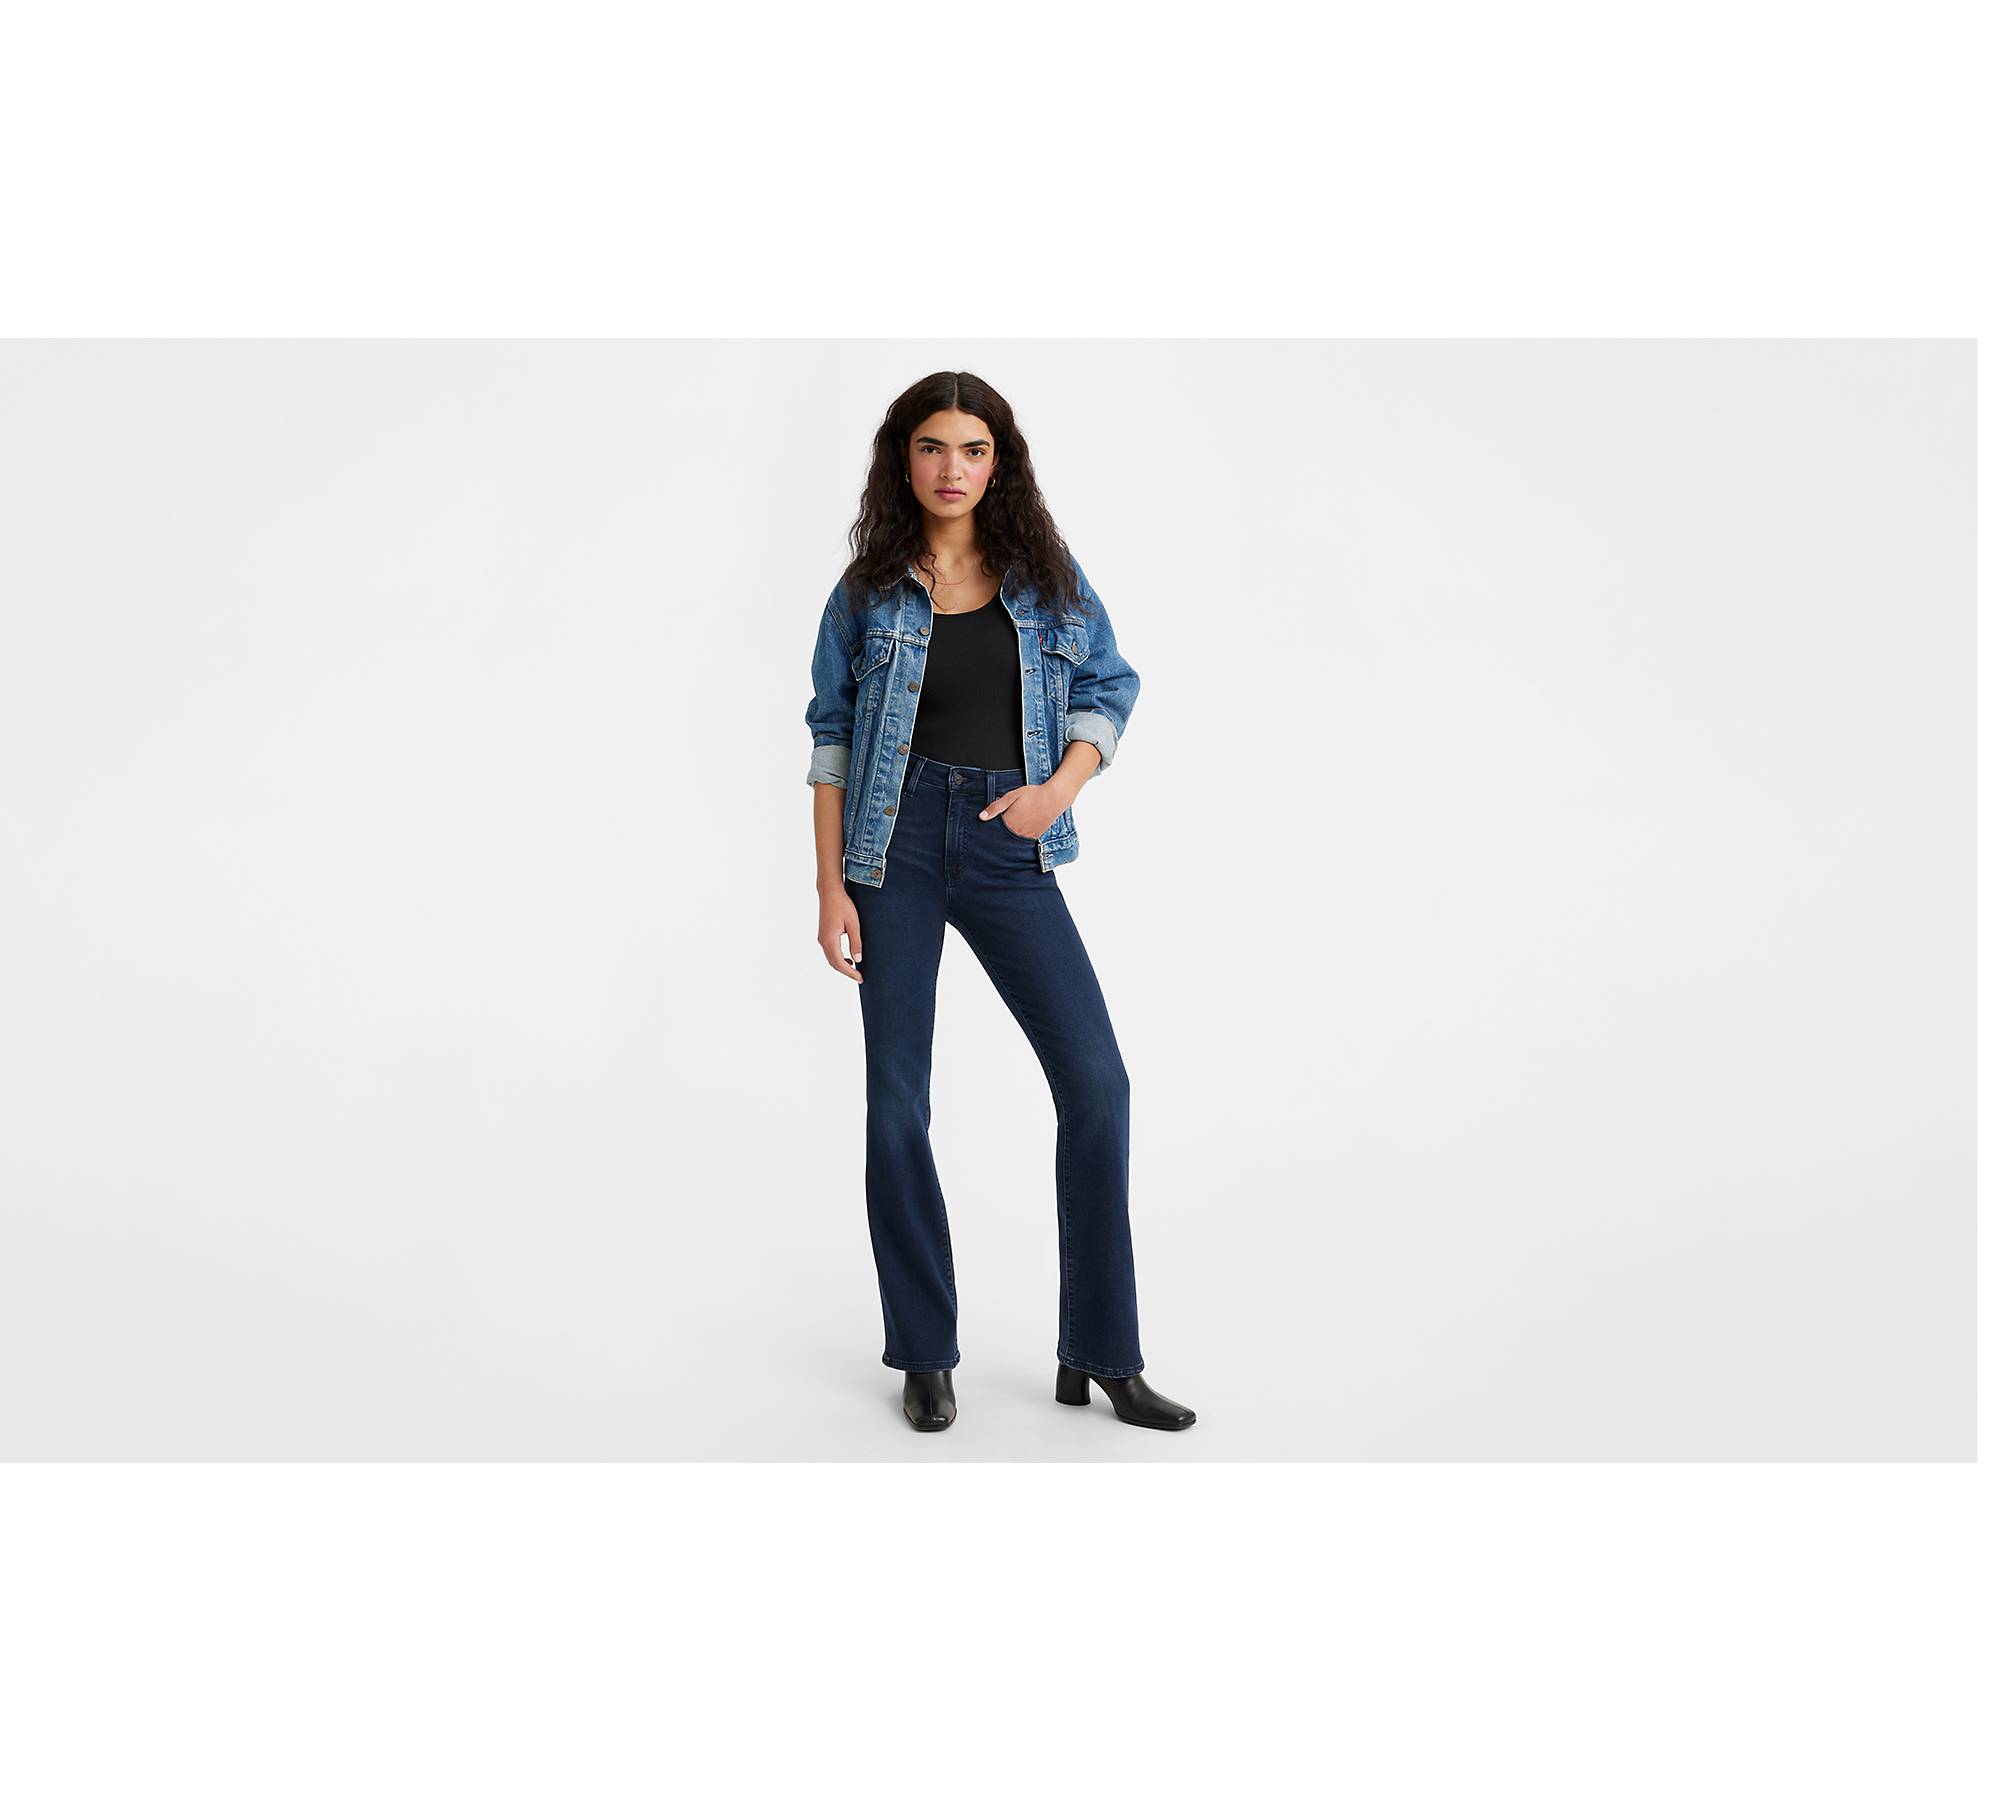 High waist jeans for women from top brands like Levi's, Pepe and more